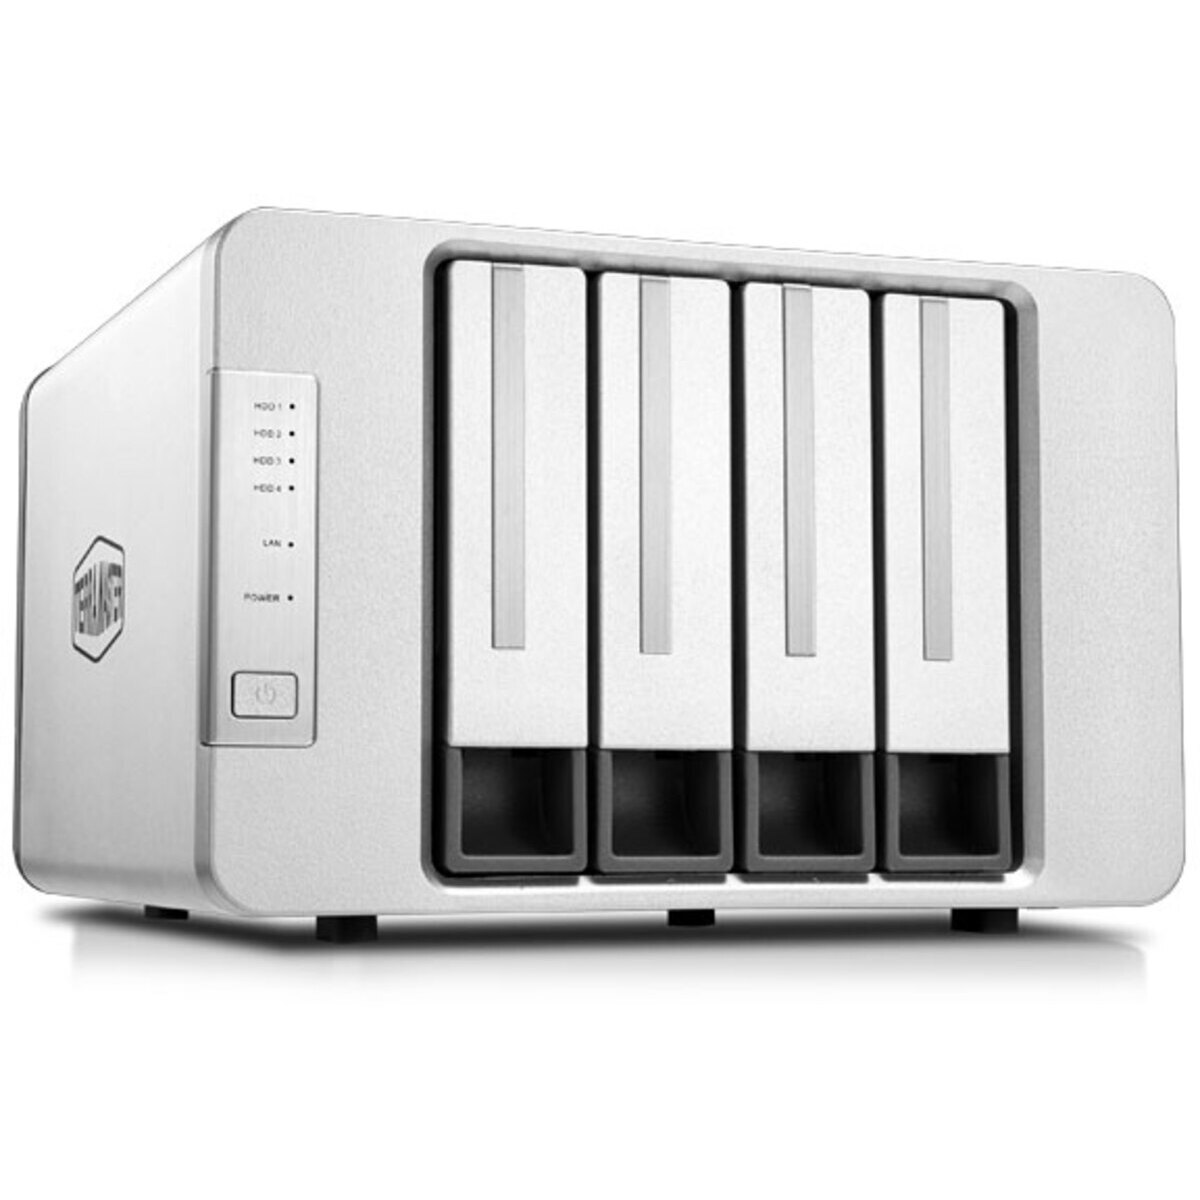 TerraMaster F4-223 24tb 4-Bay Desktop Personal / Basic Home / Small Office NAS - Network Attached Storage Device 4x6tb Western Digital Gold WD6003FRYZ 3.5 7200rpm SATA 6Gb/s HDD ENTERPRISE Class Drives Installed - Burn-In Tested - FREE RAM UPGRADE F4-223